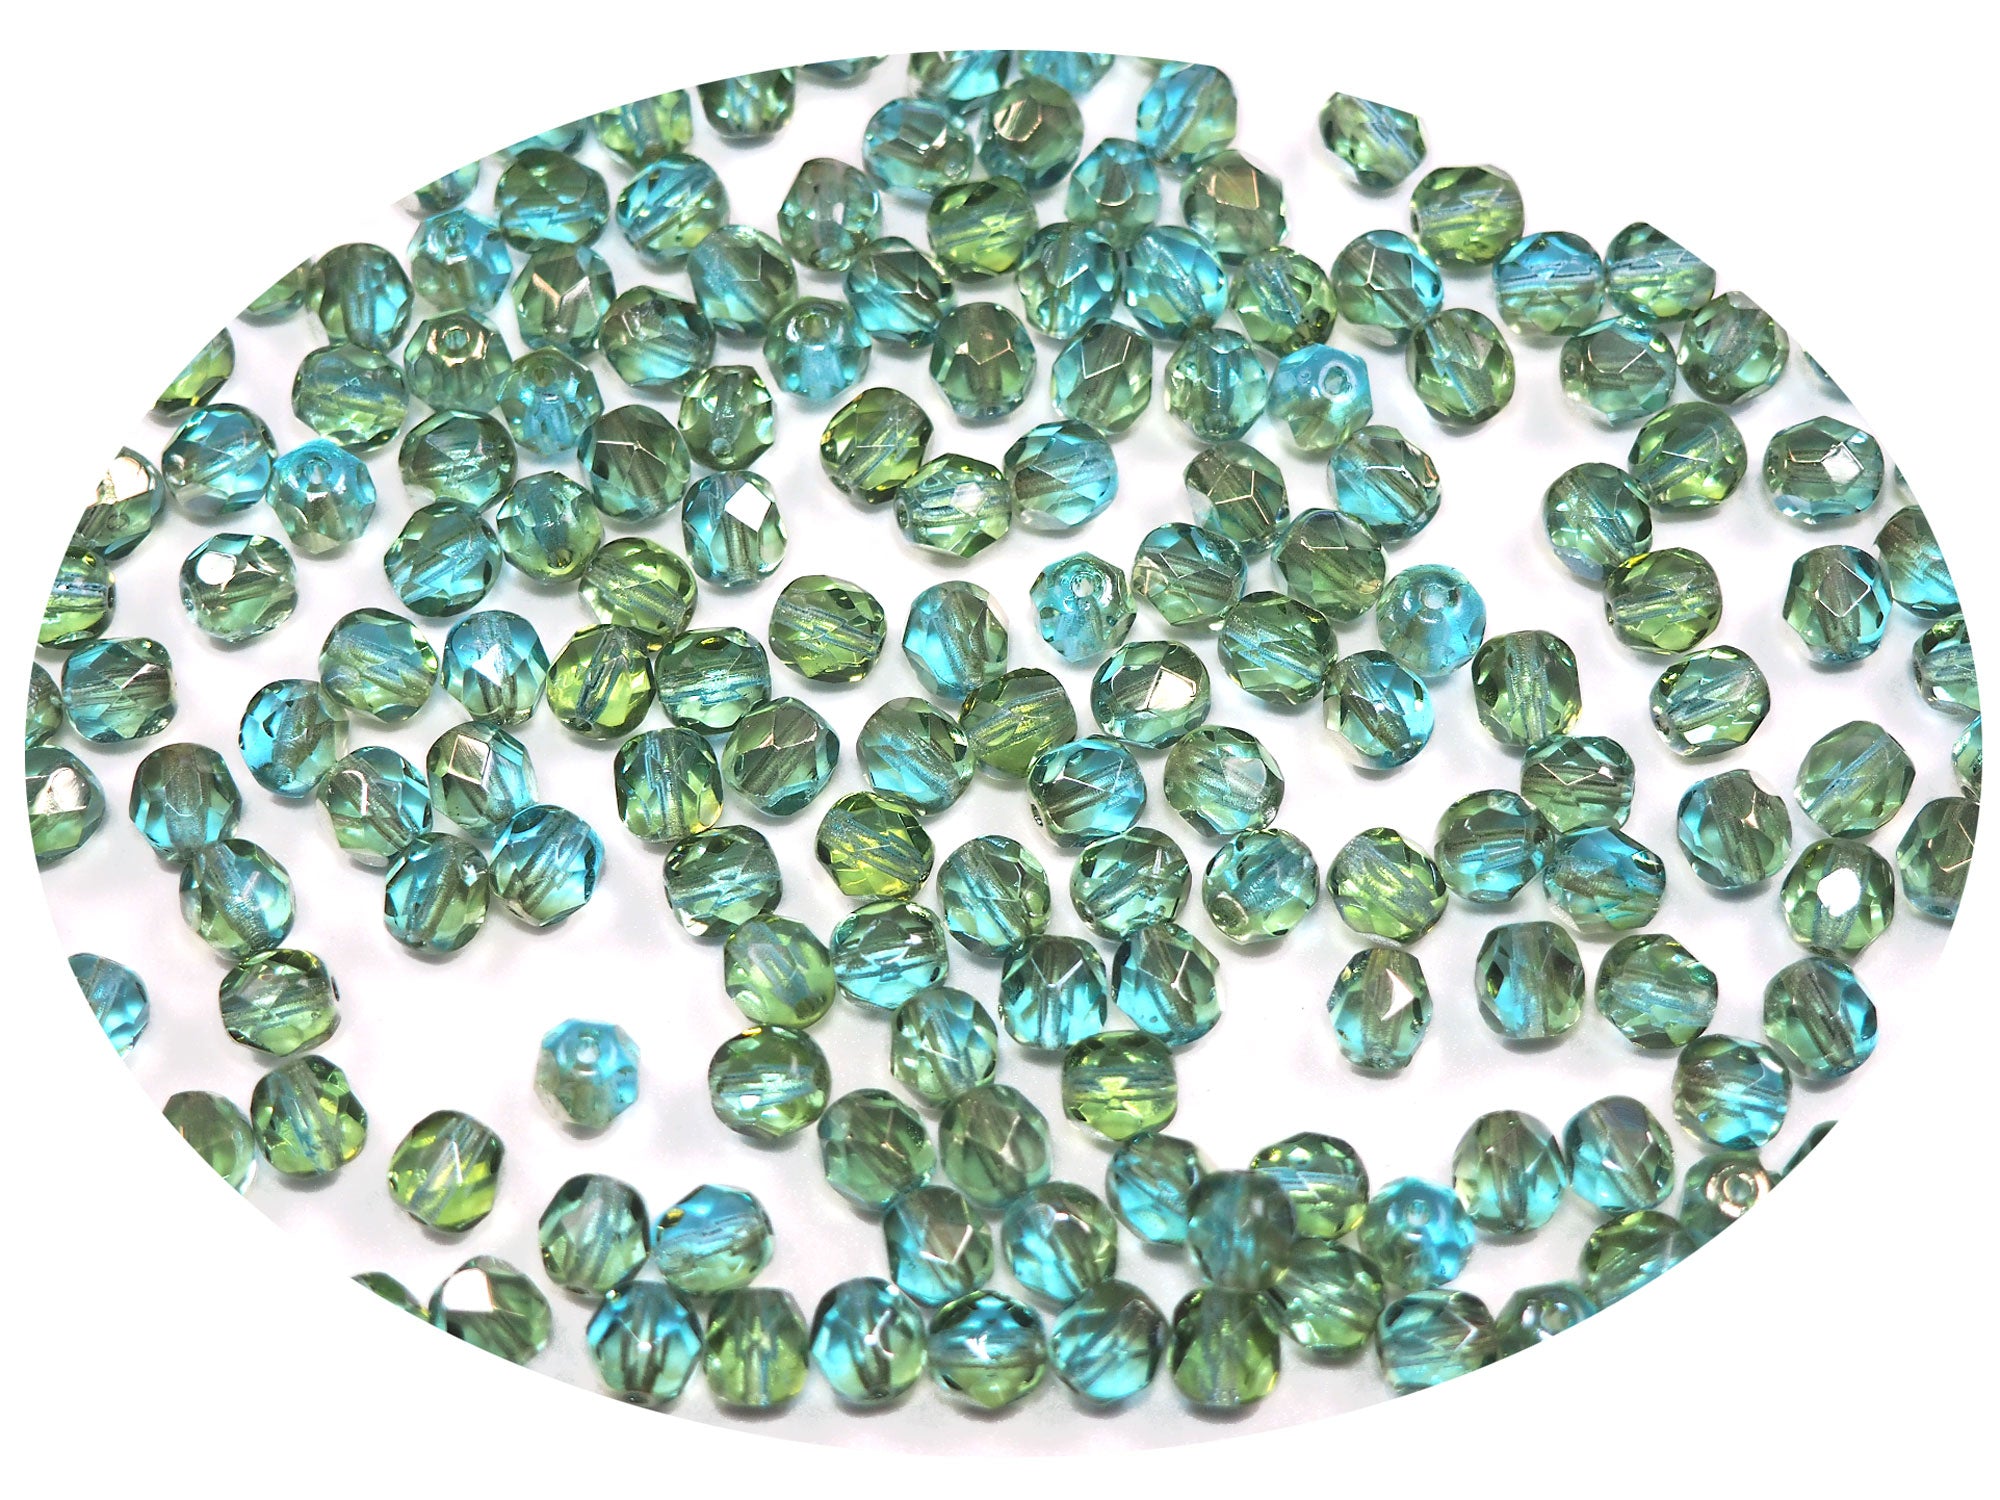 Aqua Celsian coated, Czech Fire Polished Round Faceted Glass Beads